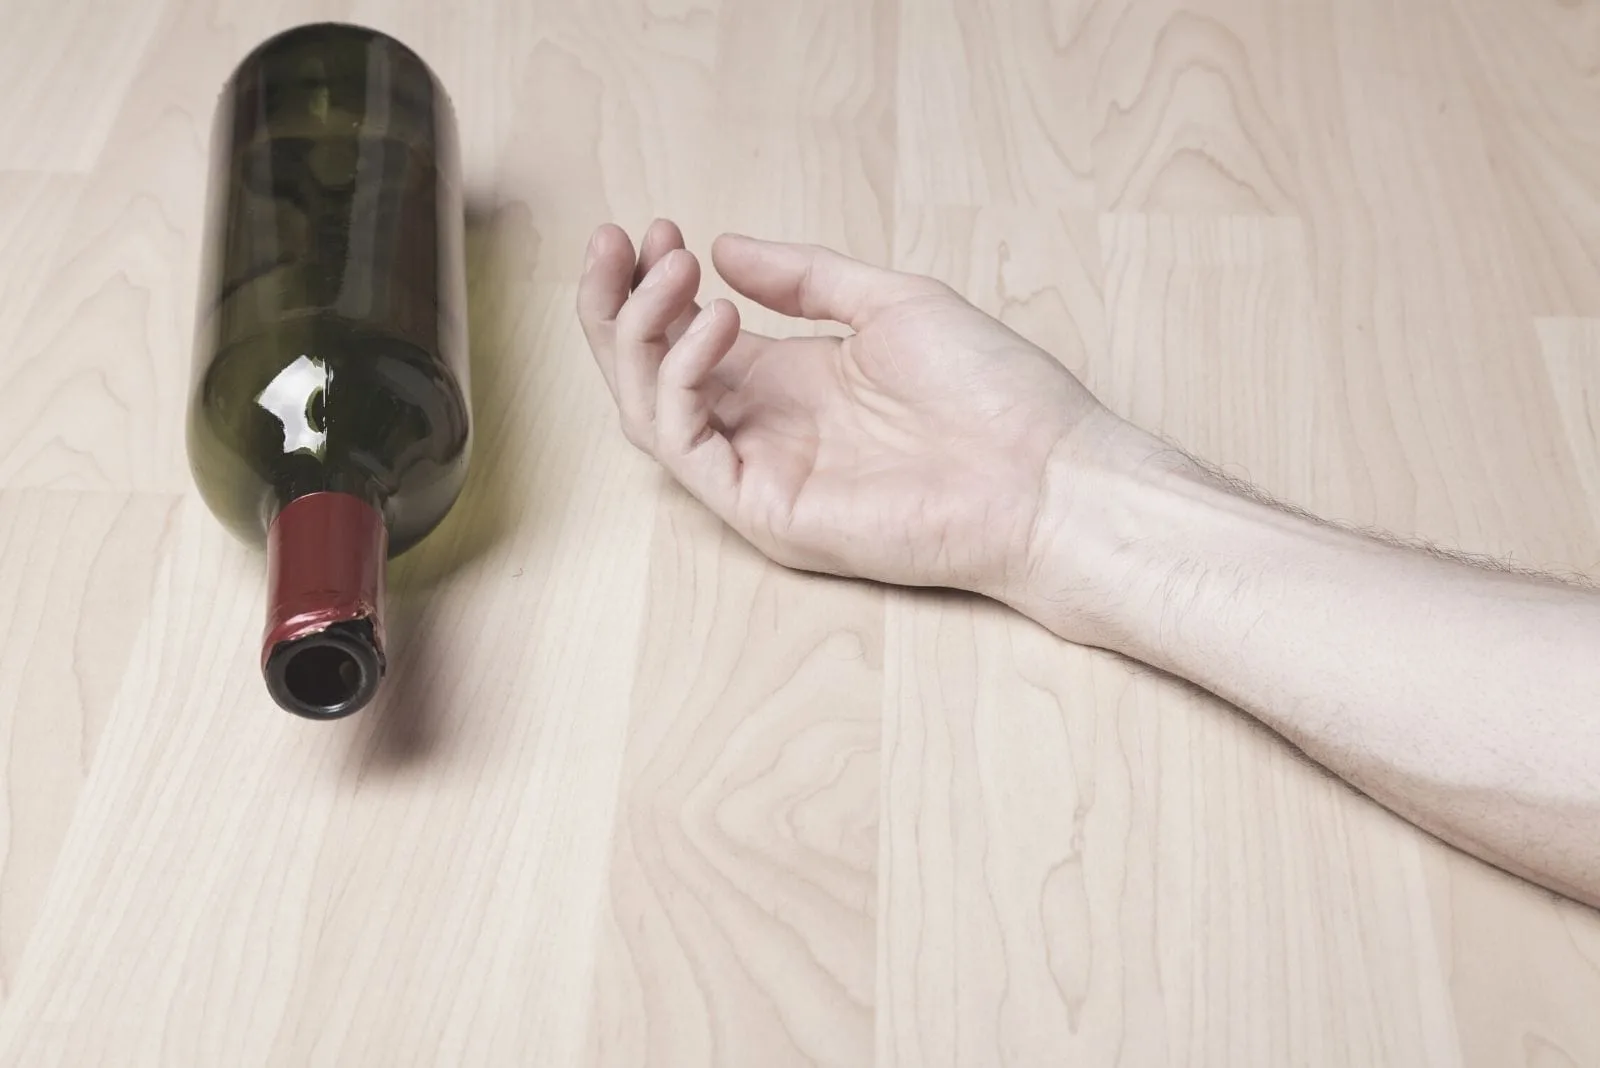 hand of a man on the floor next to an empty bottle